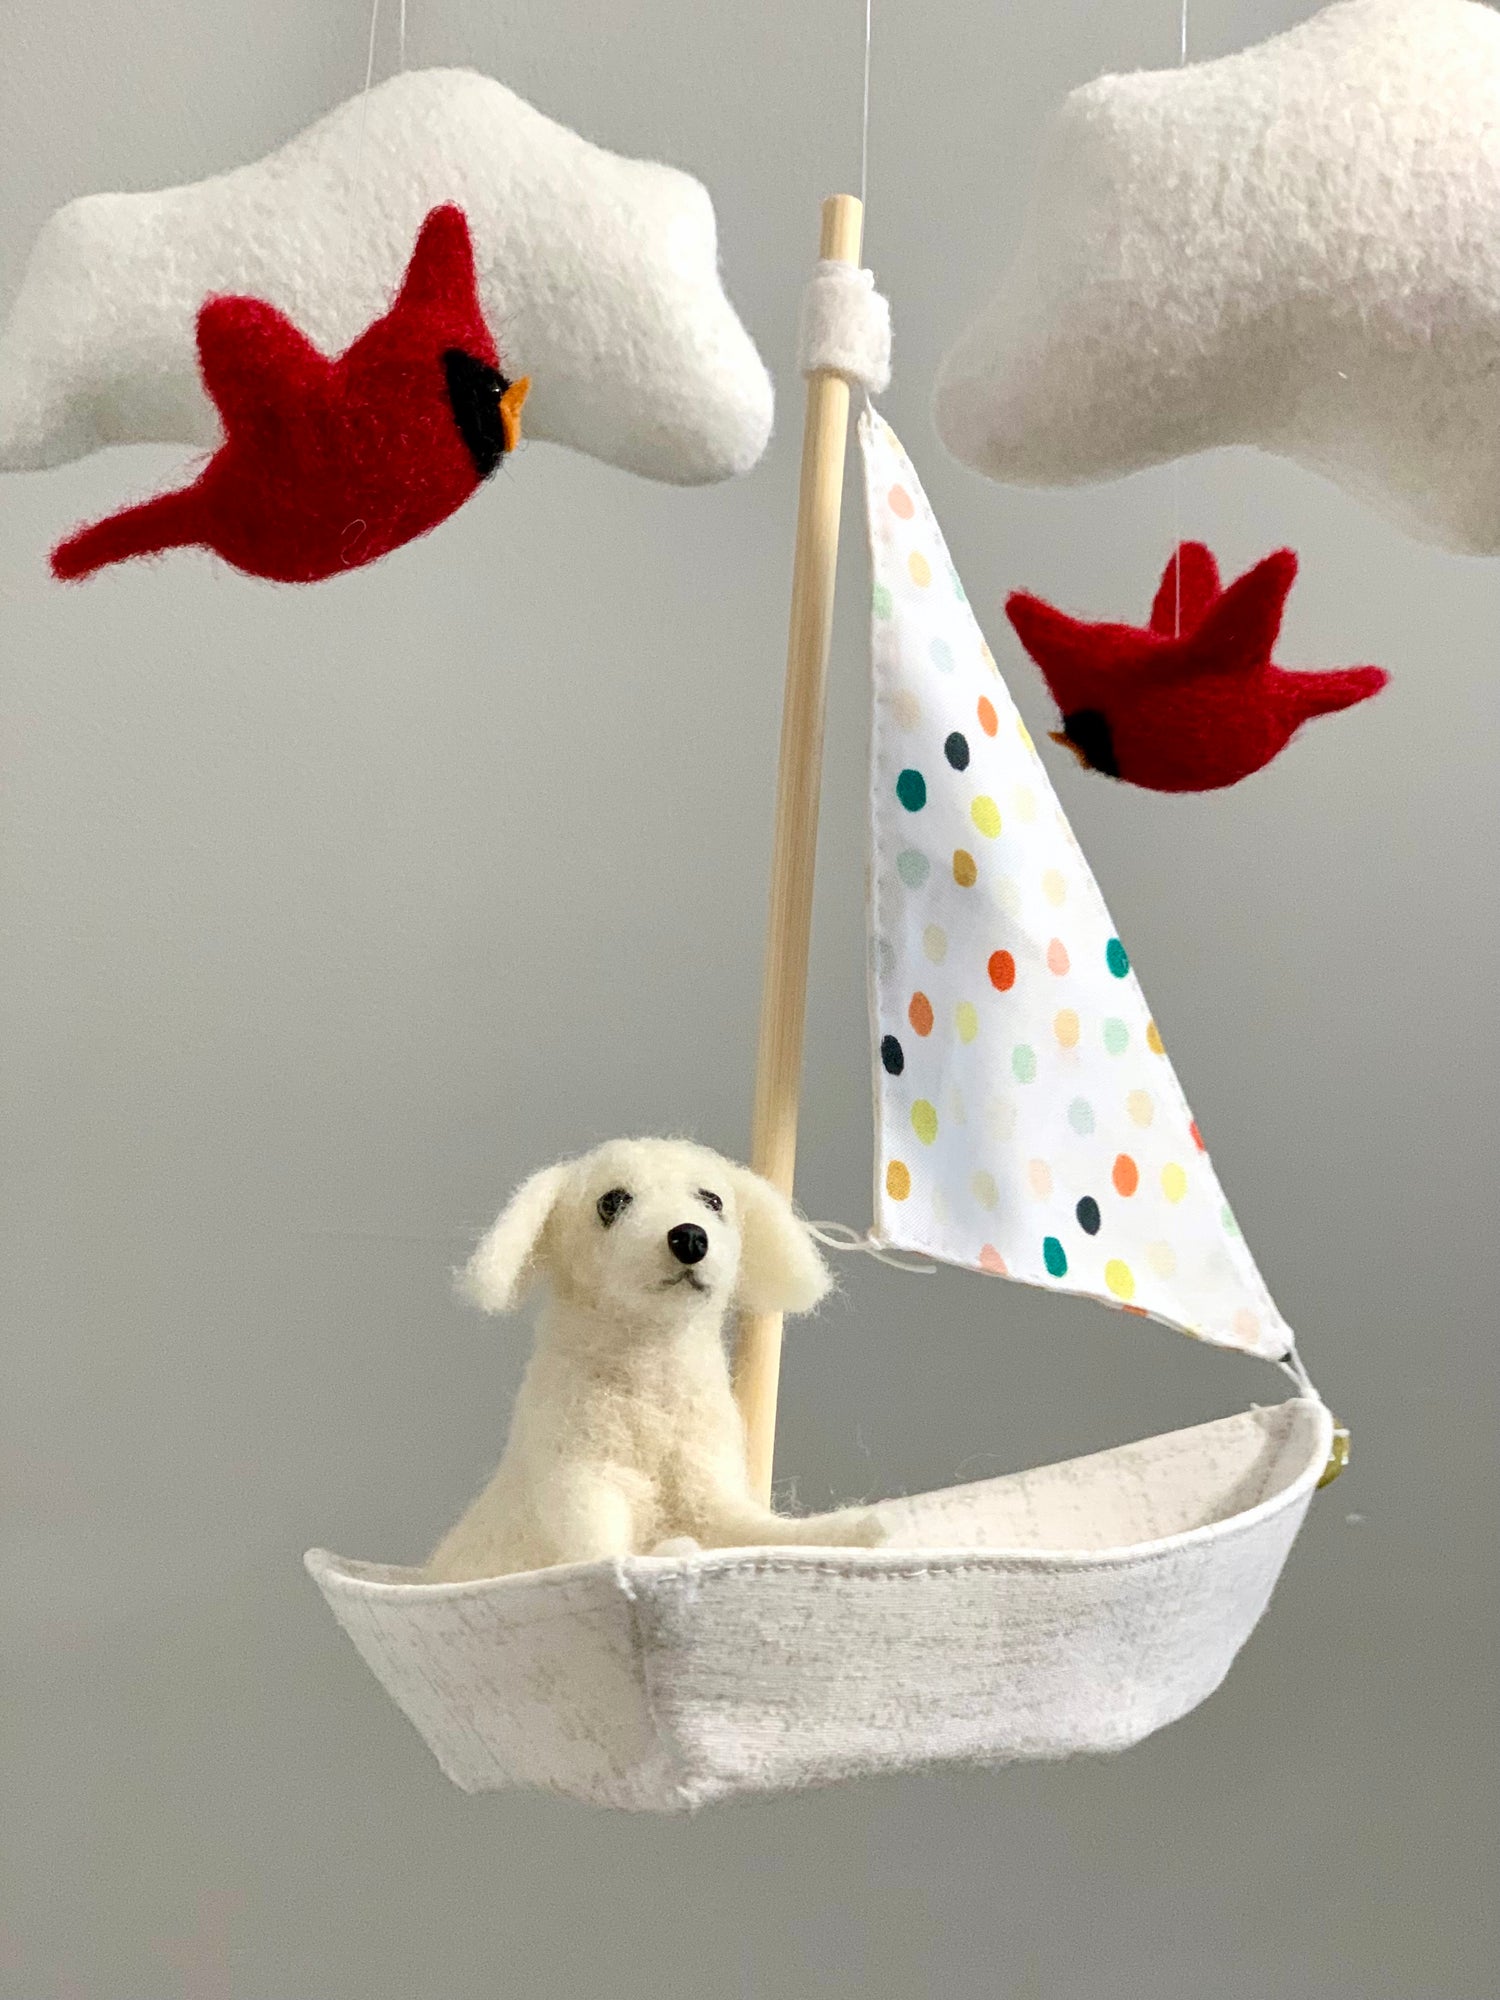 Mobile of a small white needle-felted dog sitting in a sailboat with two red cardinals flying above along with two felt clouds.